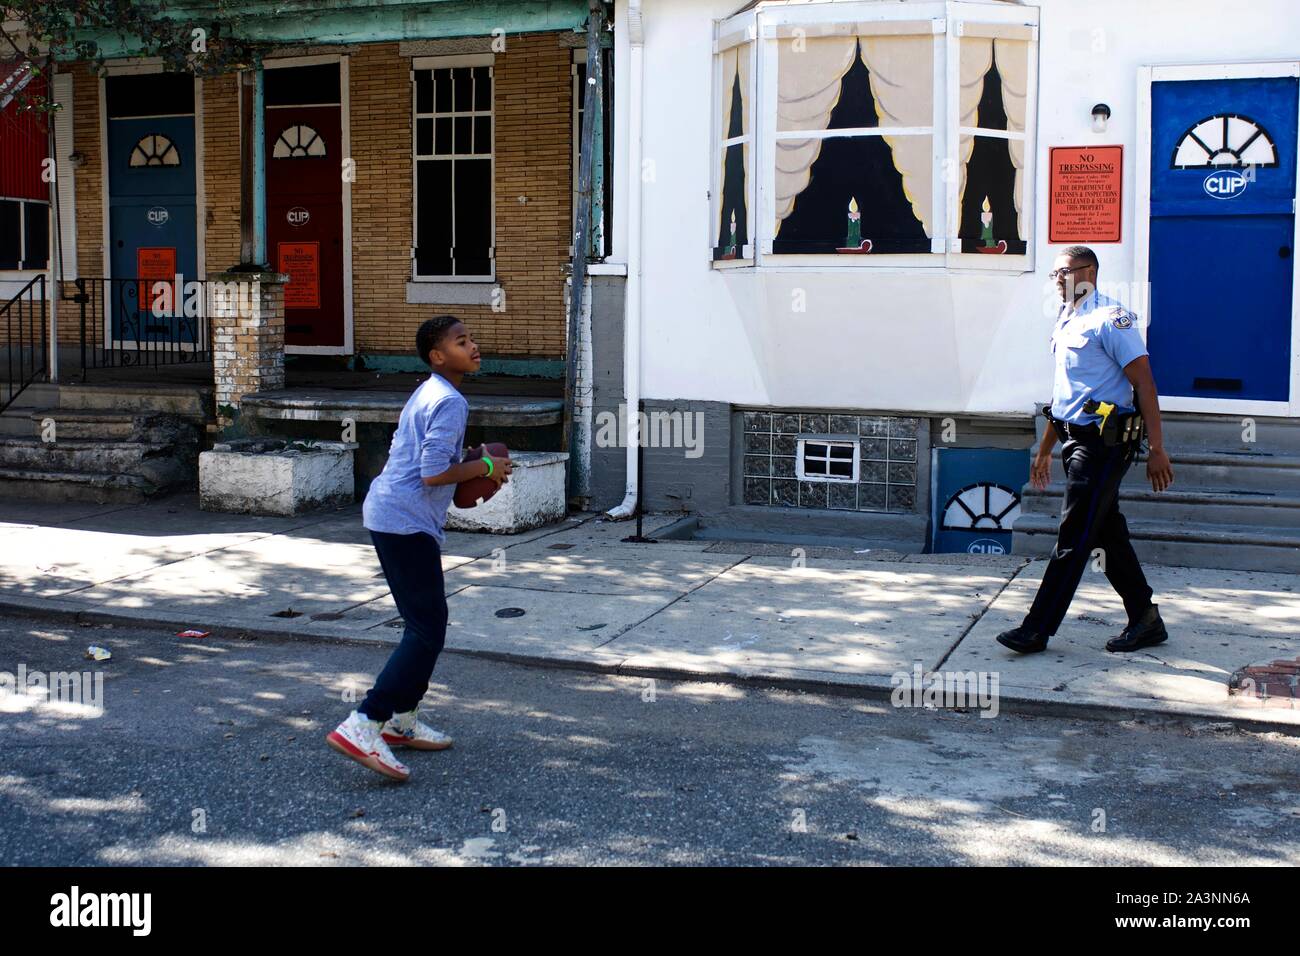 Police officers interact with youth from the community during a block party on Sunday October 5, 2019 at the site of the August Police shooting and ho Stock Photo